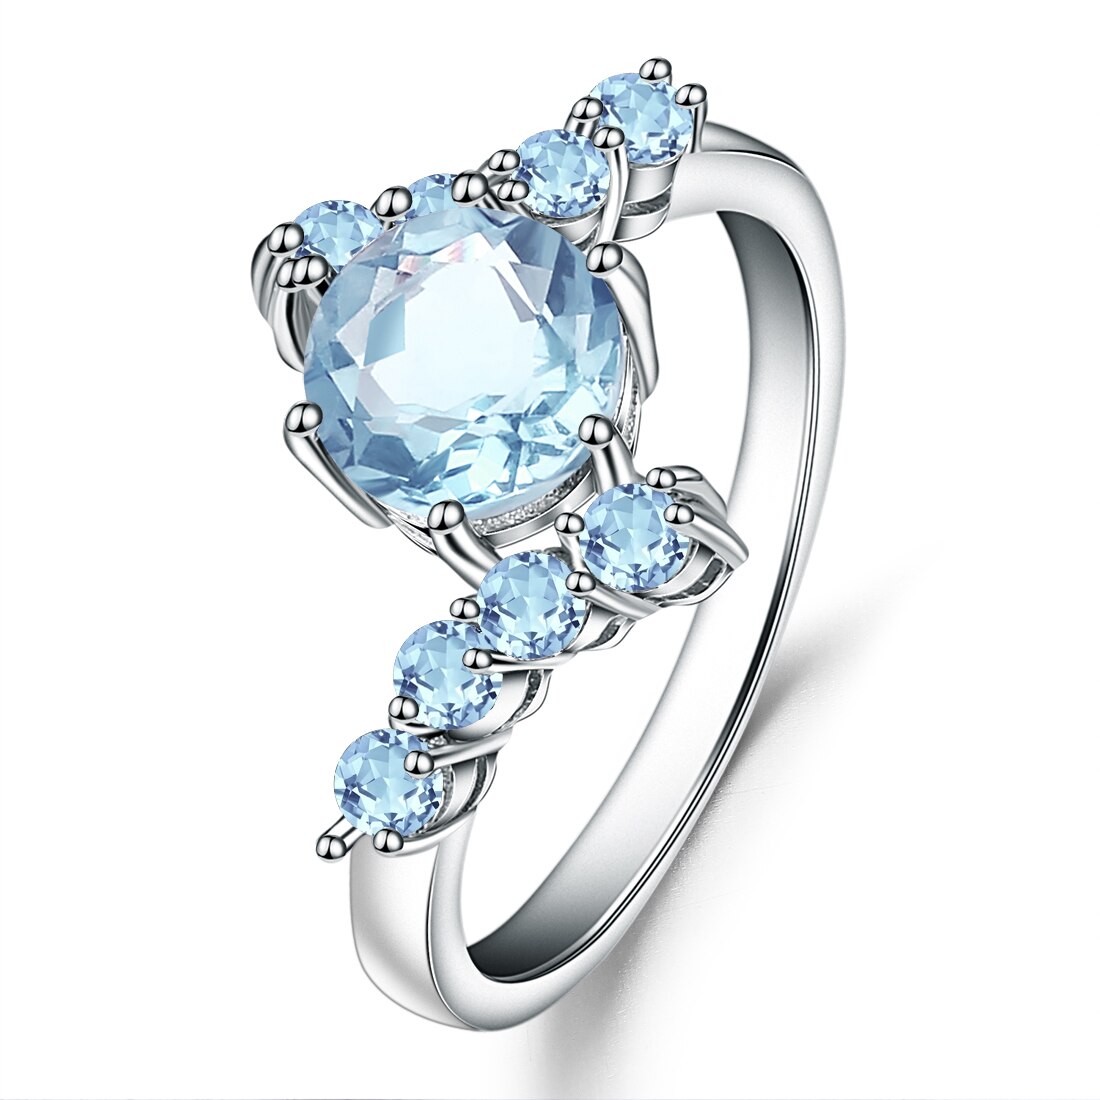 GEM&#39;S BALLET 100% 925 Sterling Silver Engagement Rings 1.35Ct Round Natural Amethyst Gemstone Ring for Women Fine Jewelry Sky Blue Topaz|925 Sterling Silver